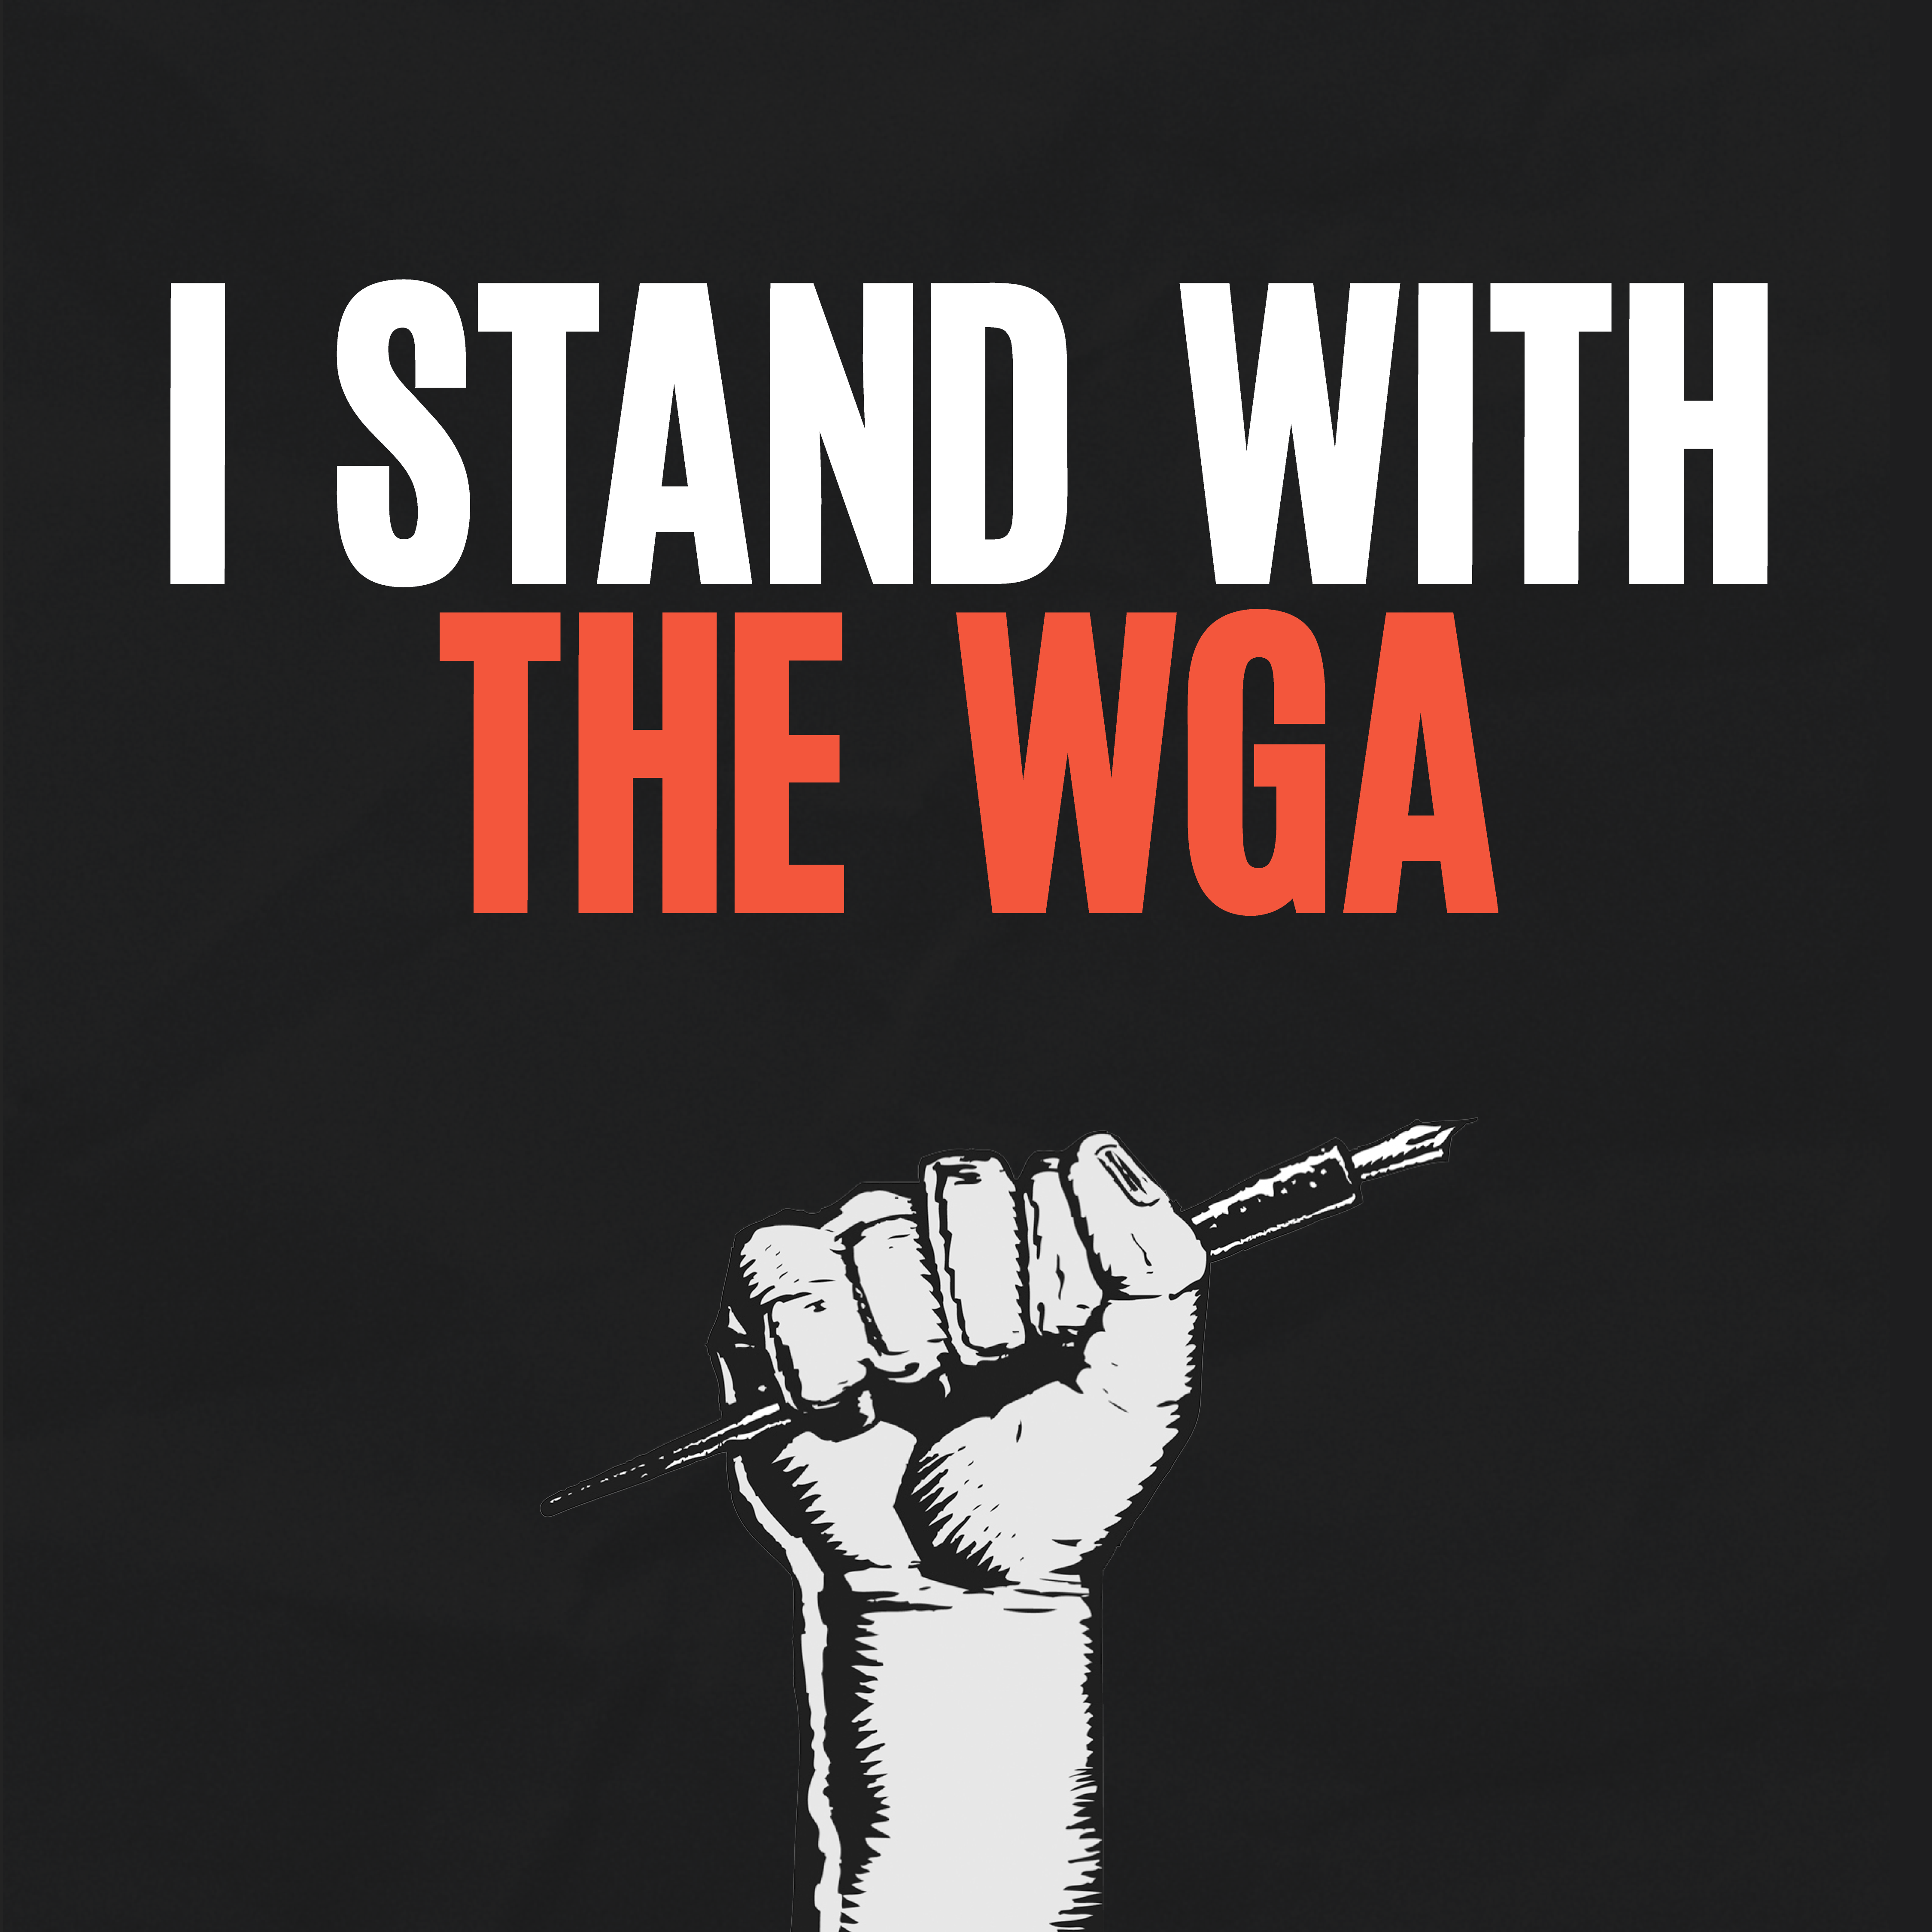 A black square featuring a pen in a raised fist, beneath block text: "I STAND WITH THE WGA".